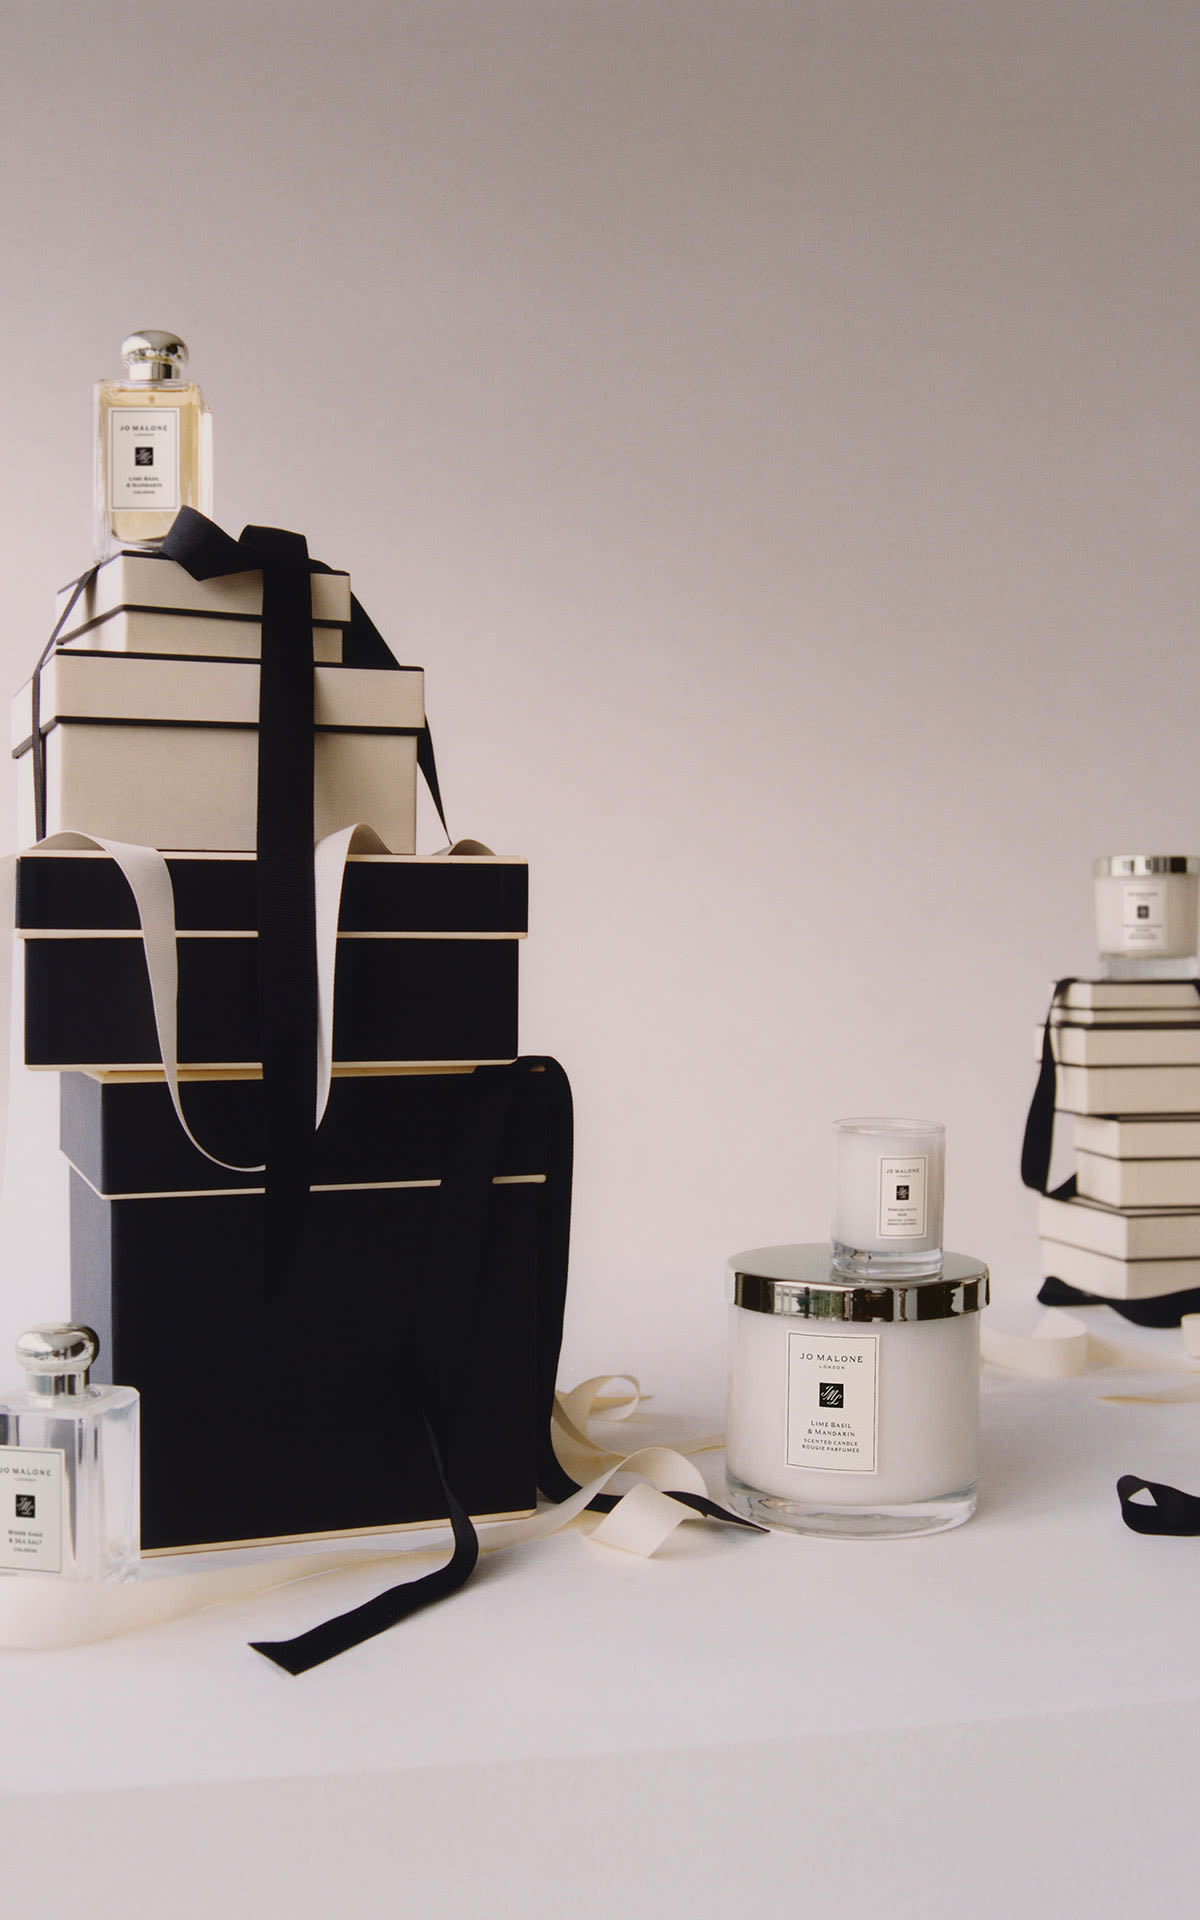 Jo Malone London main image gift boxes at Bicester Village